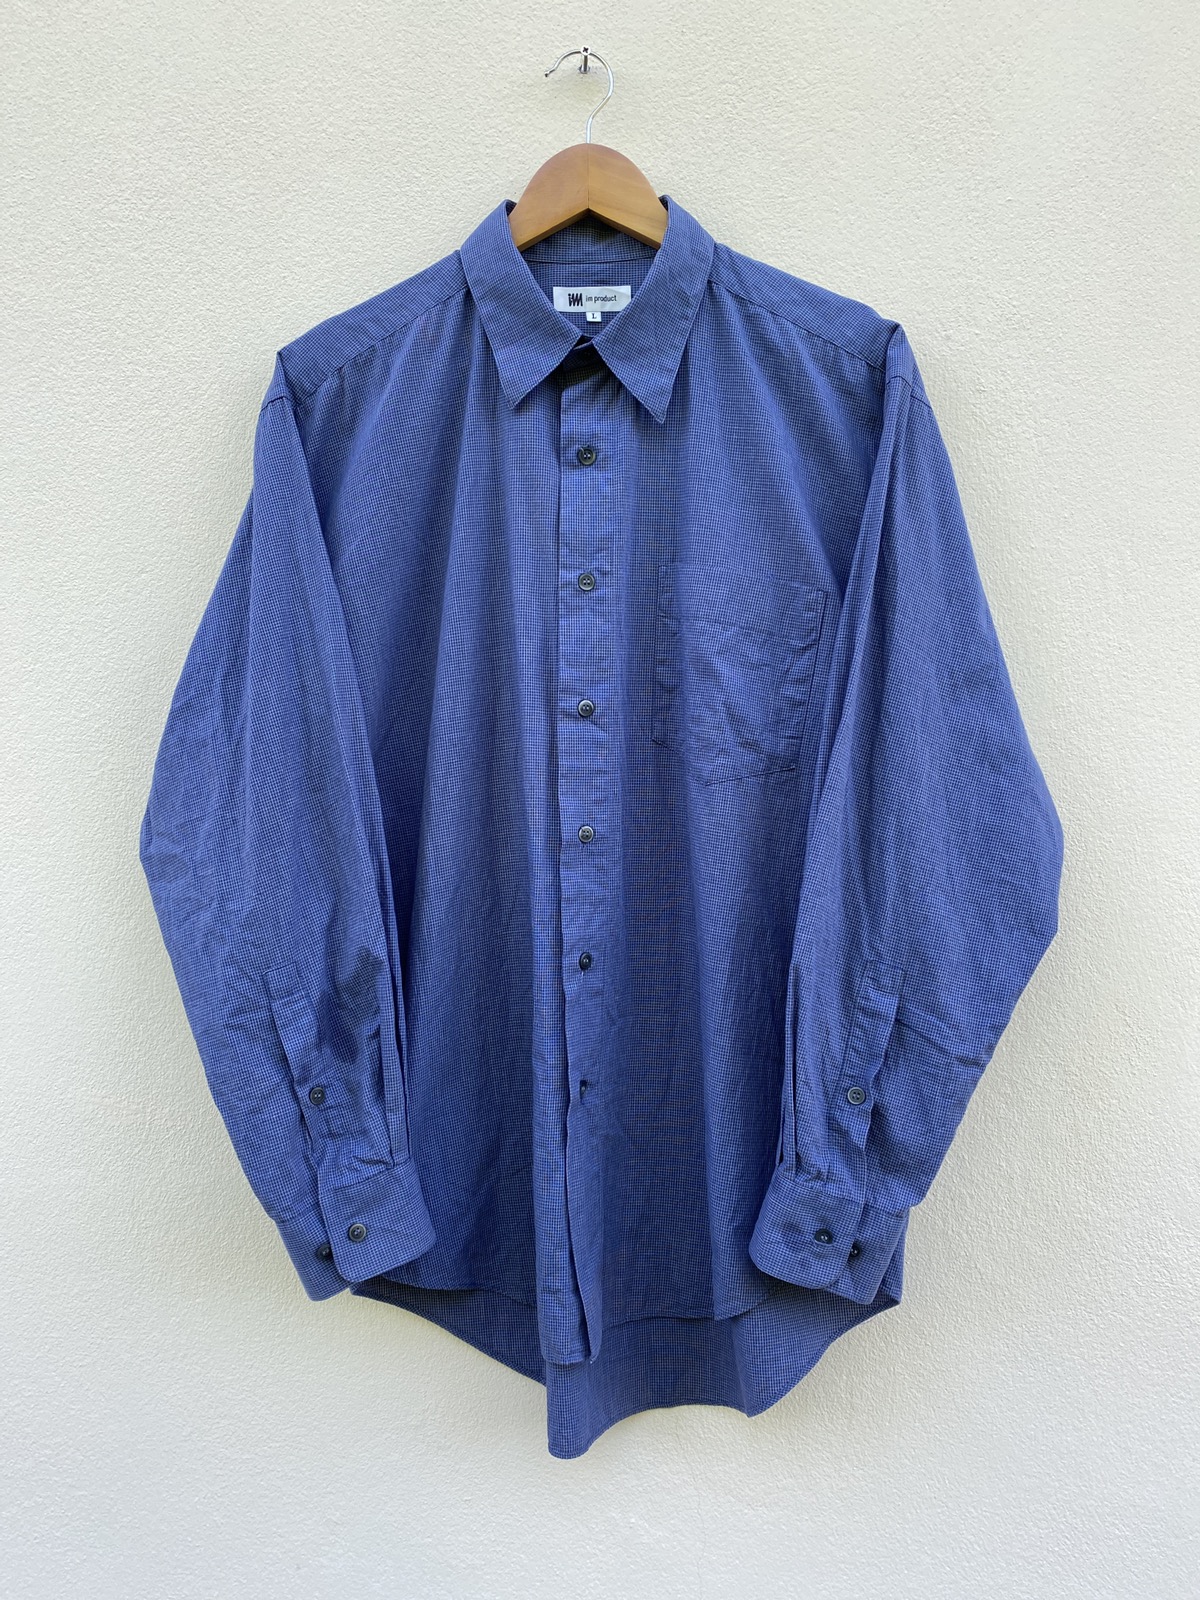 Vintage - Issey Miyake IM product Button Ups Shirt Made In Japan - 1